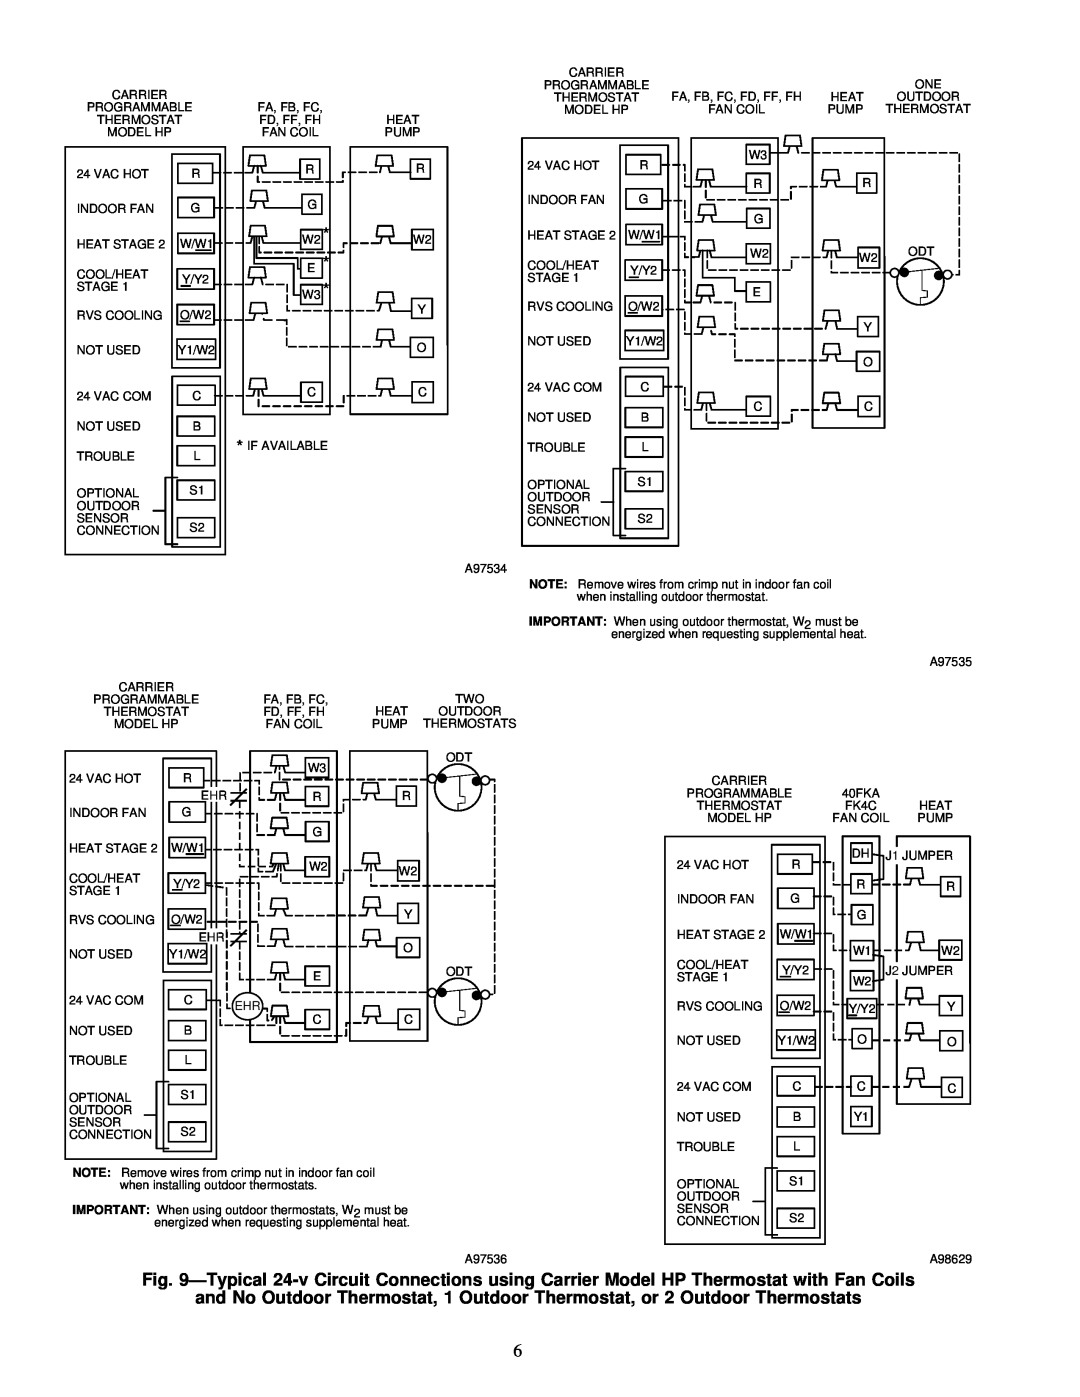 Carrier 38YSA instruction manual Programmable 